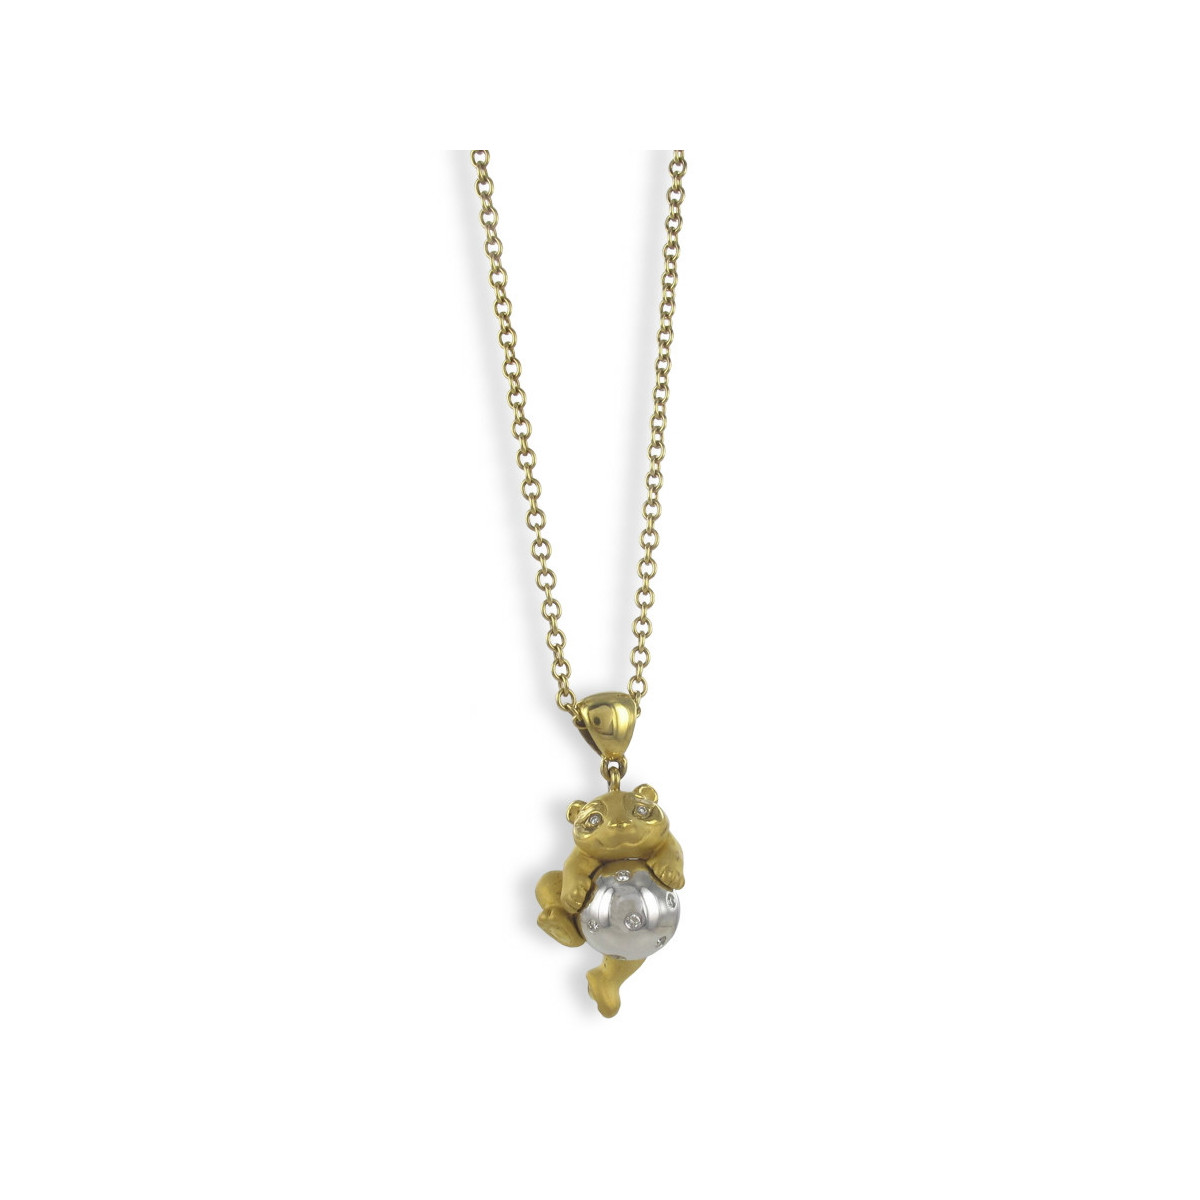 CHAIN WITH 2 GOLD BEAR PENDANT